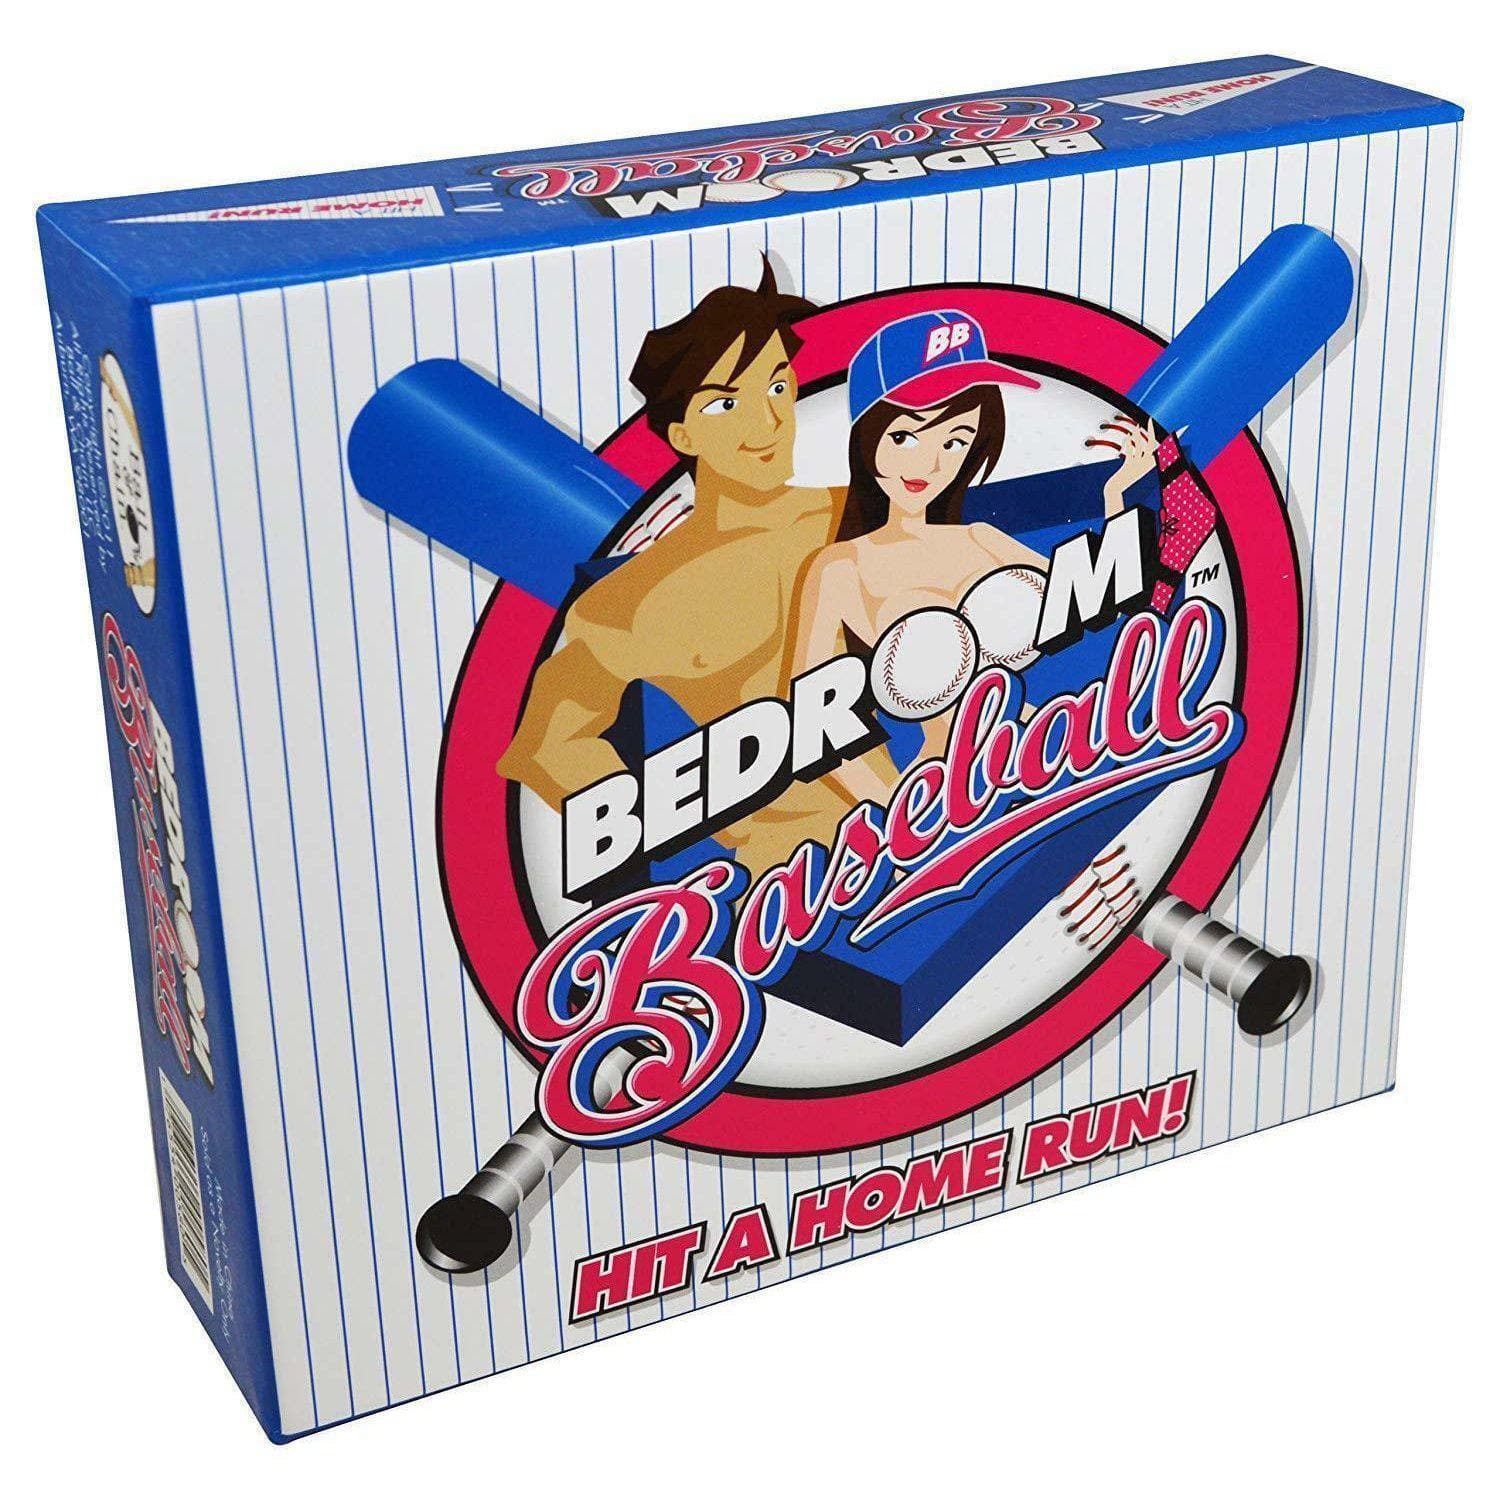 Bedroom Baseball Adult Couple Bedroom Romantic Sexy Foreplay Game - Romantic Blessings